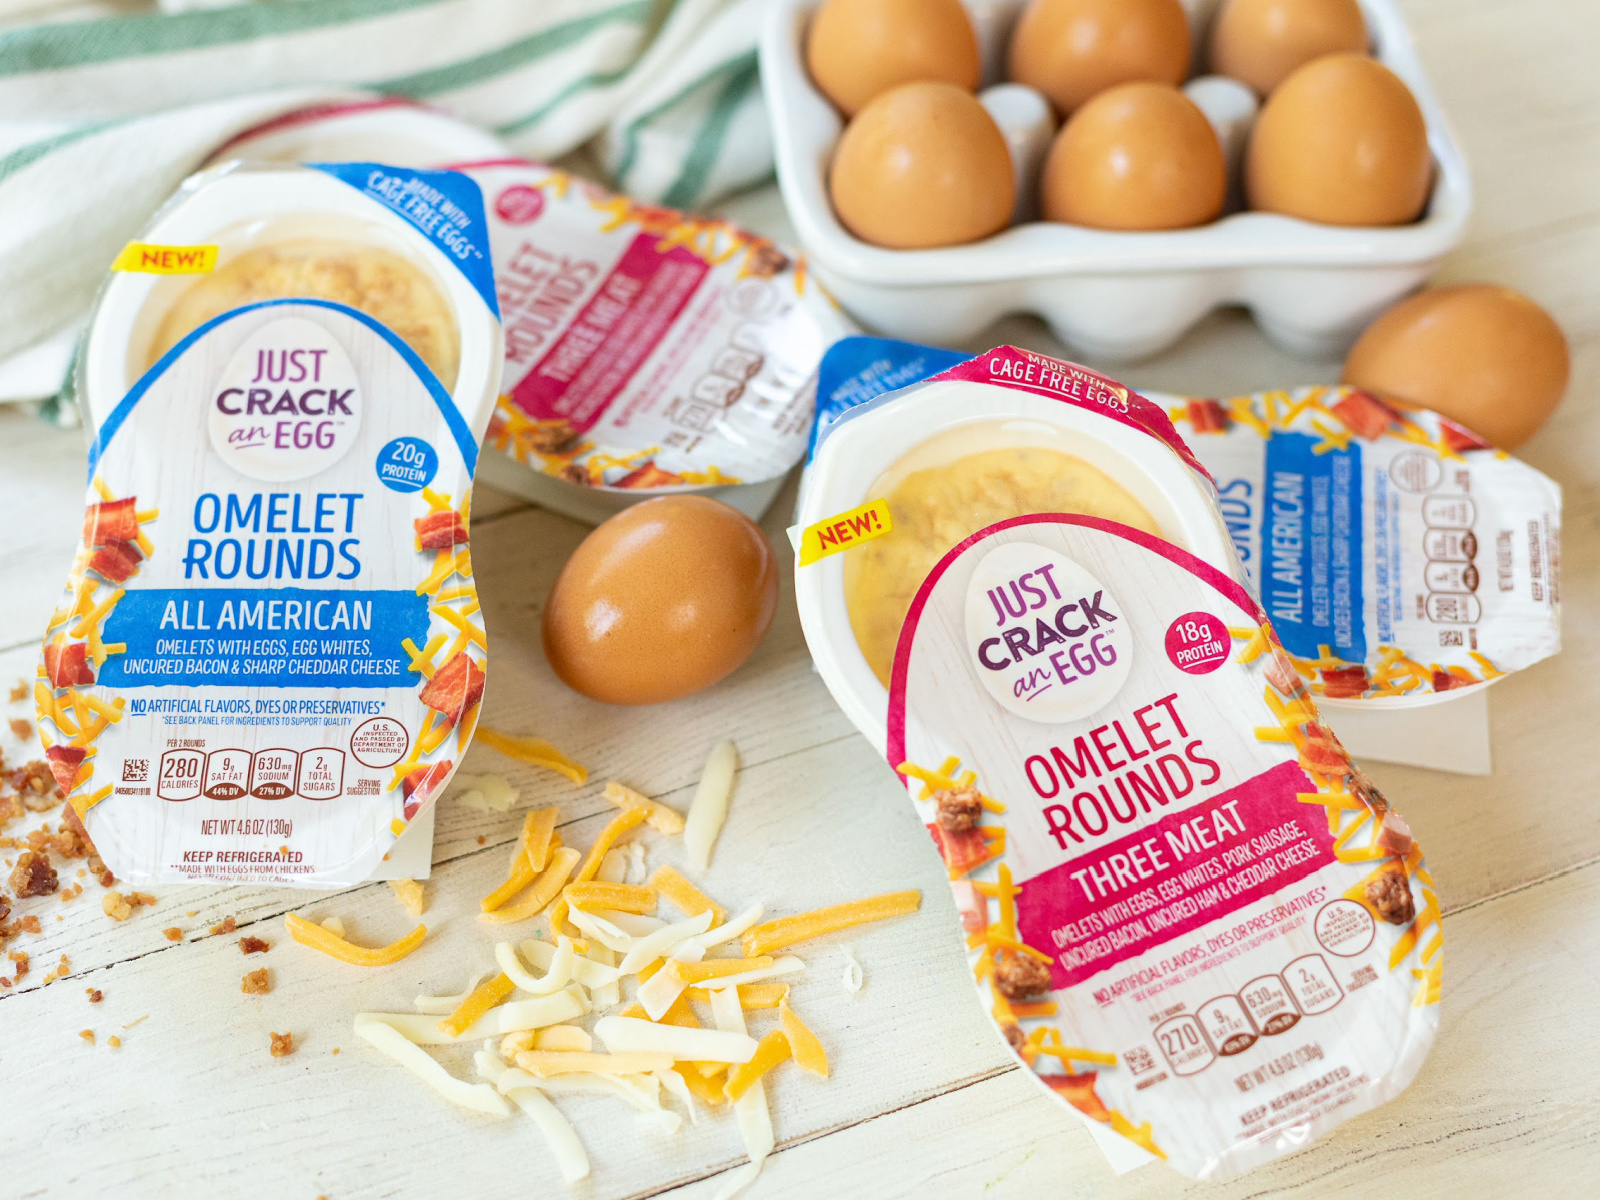 Look For Just Crack An Egg Omelet Rounds At Your Local Publix on I Heart Publix